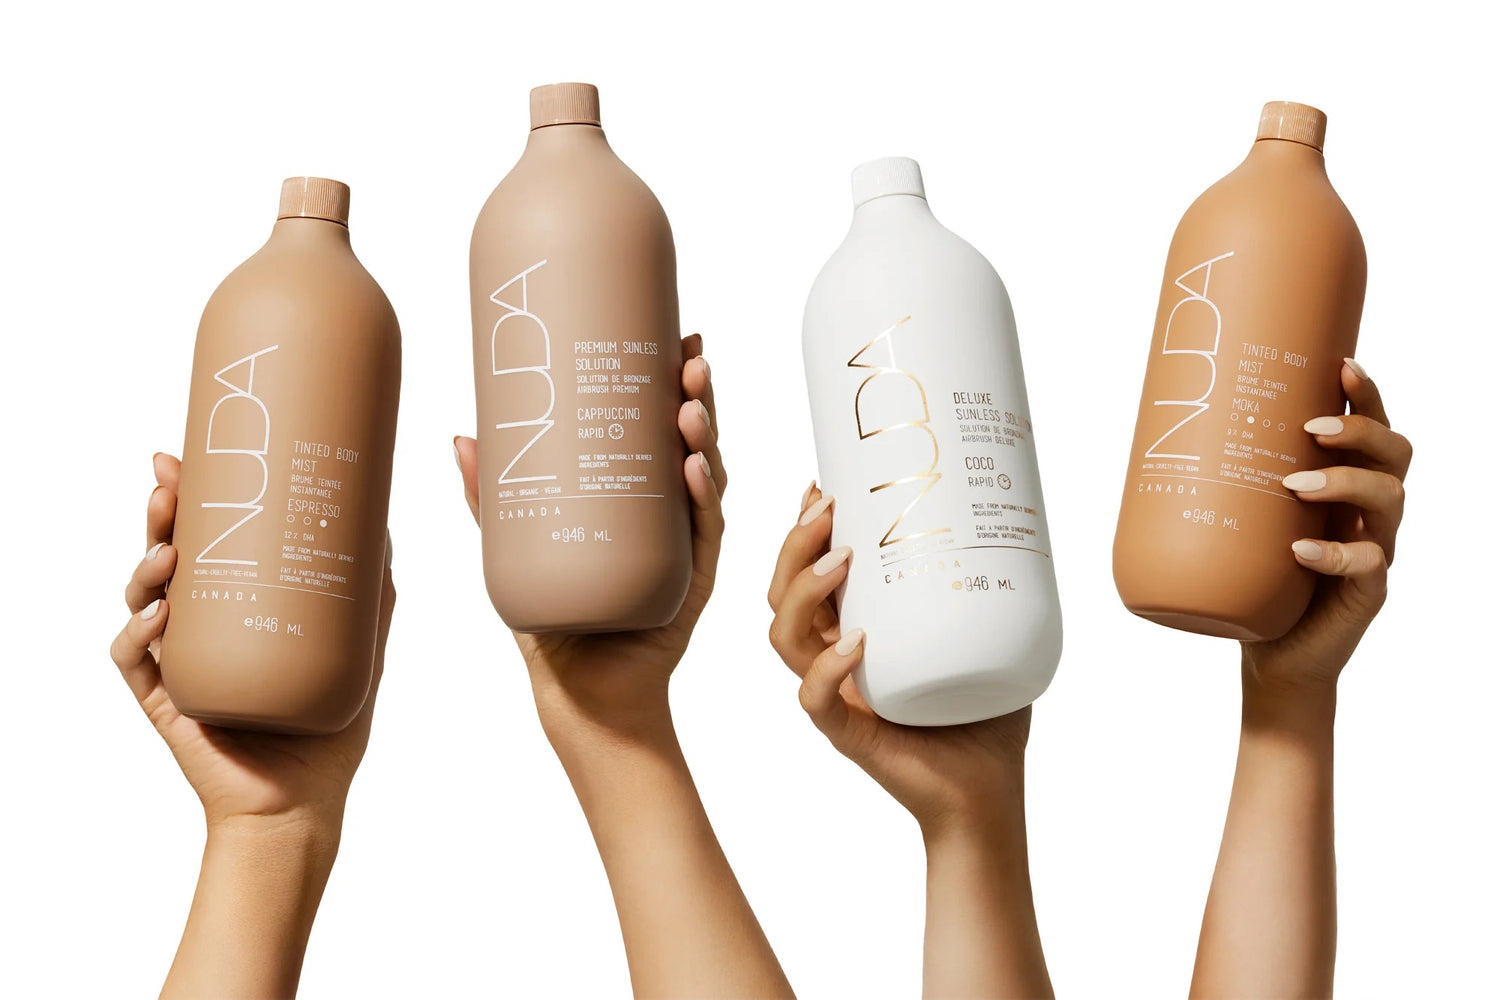 Four individual hands hold up a variety of sunless tanning bottles that hold products that will result in various hues.